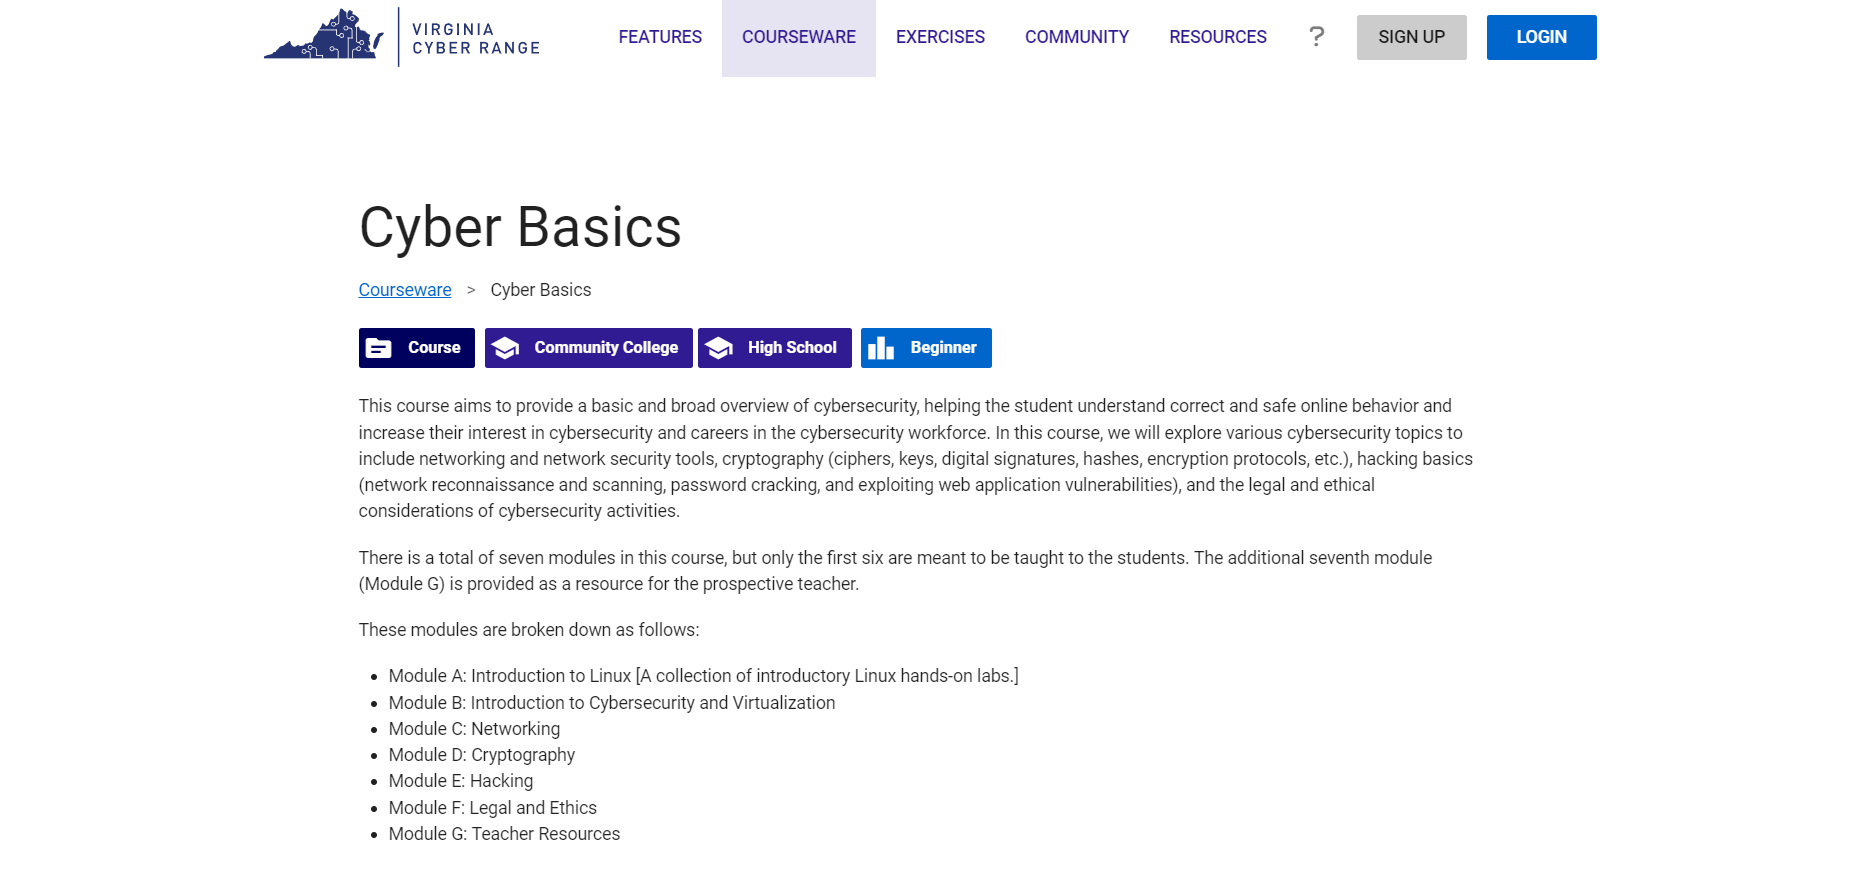 The Cyber Basics course page is shown listing its description, modules, and learning objectives.